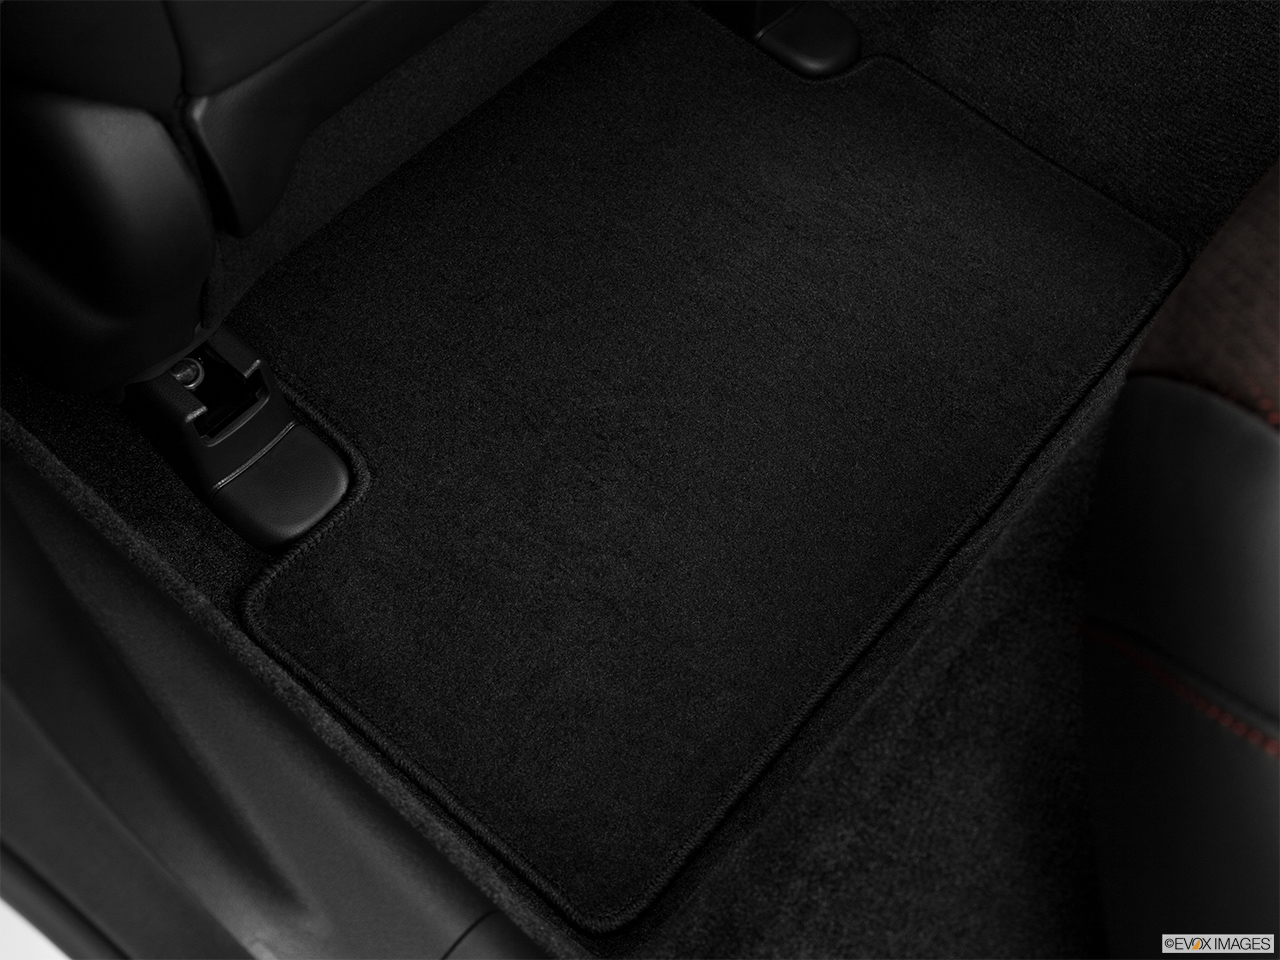 2013 Acura TSX Special Edition 5-Speed Automatic Rear driver's side floor mat. Mid-seat level from outside looking in. 